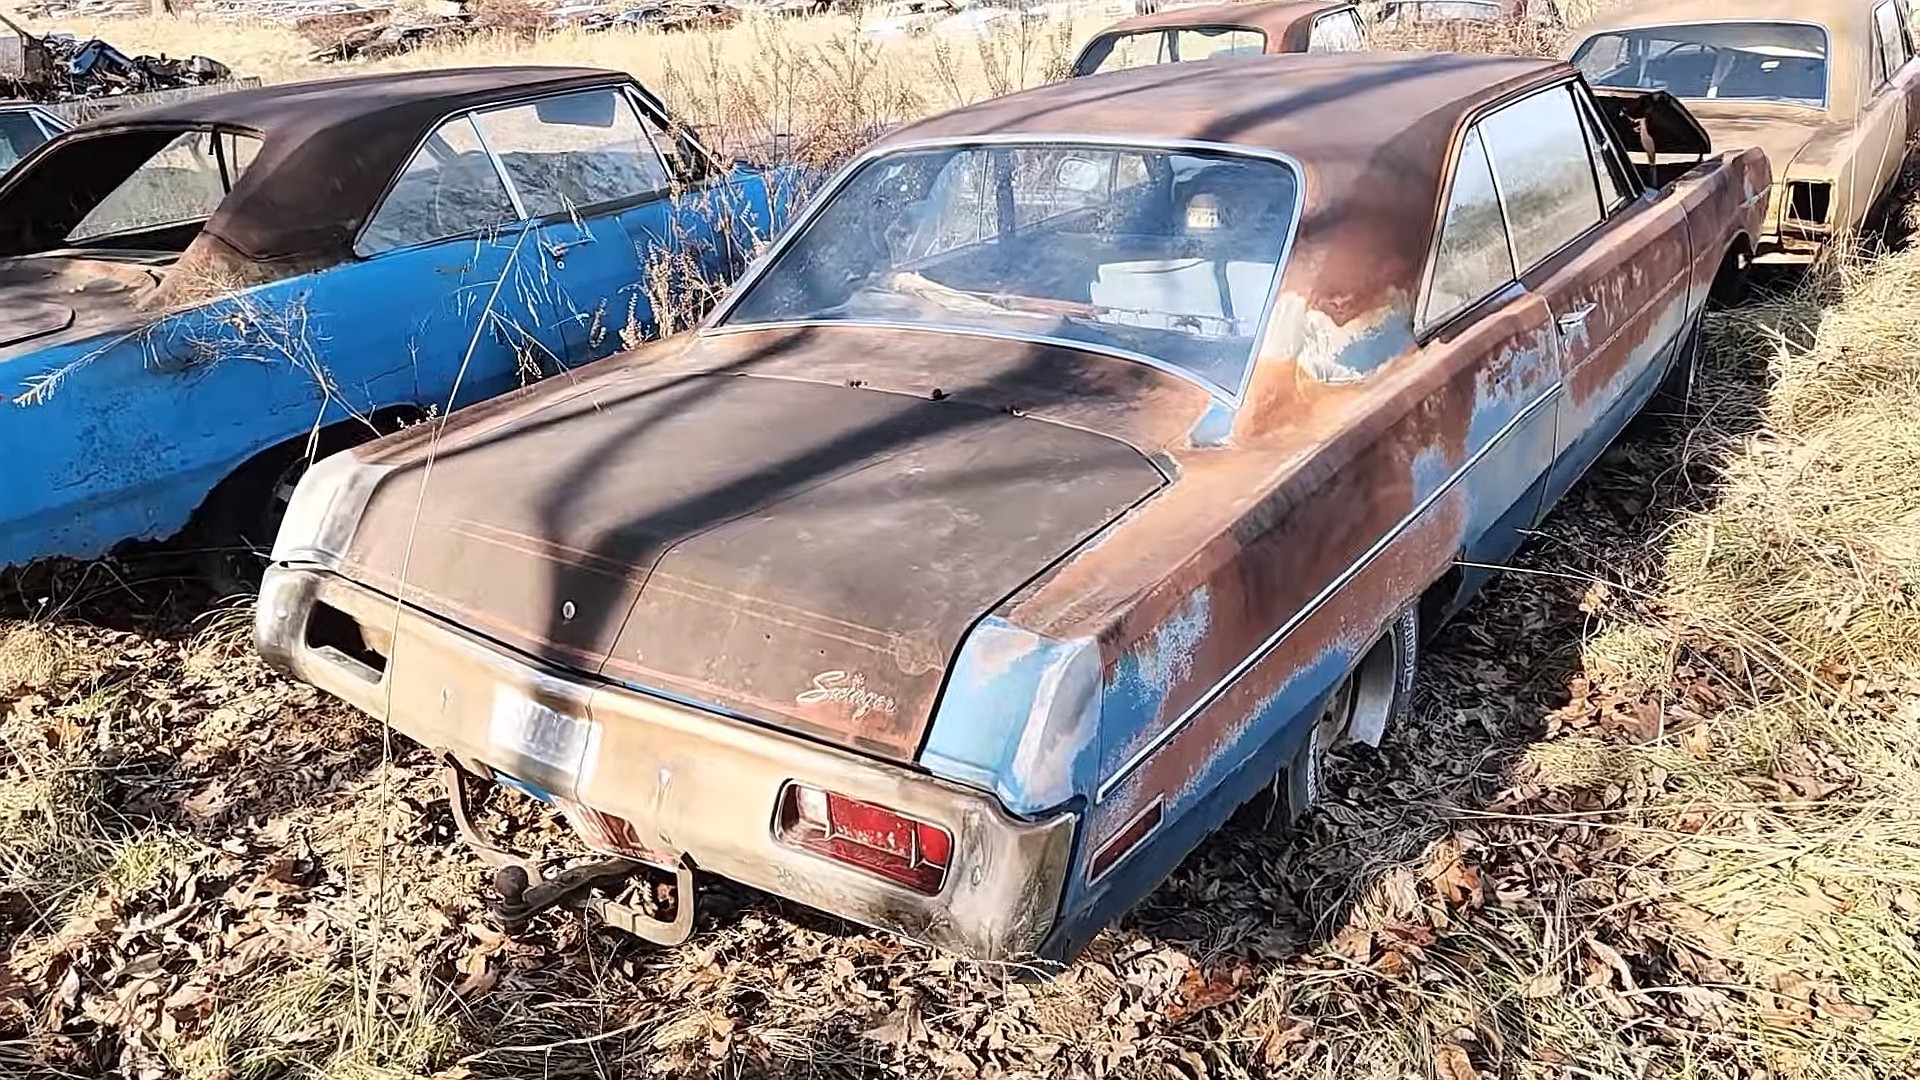 Worlds Rarest 1970 Dodge Dart Is a Super Swinger Automatic Rotting Away in a Backyard pic photo